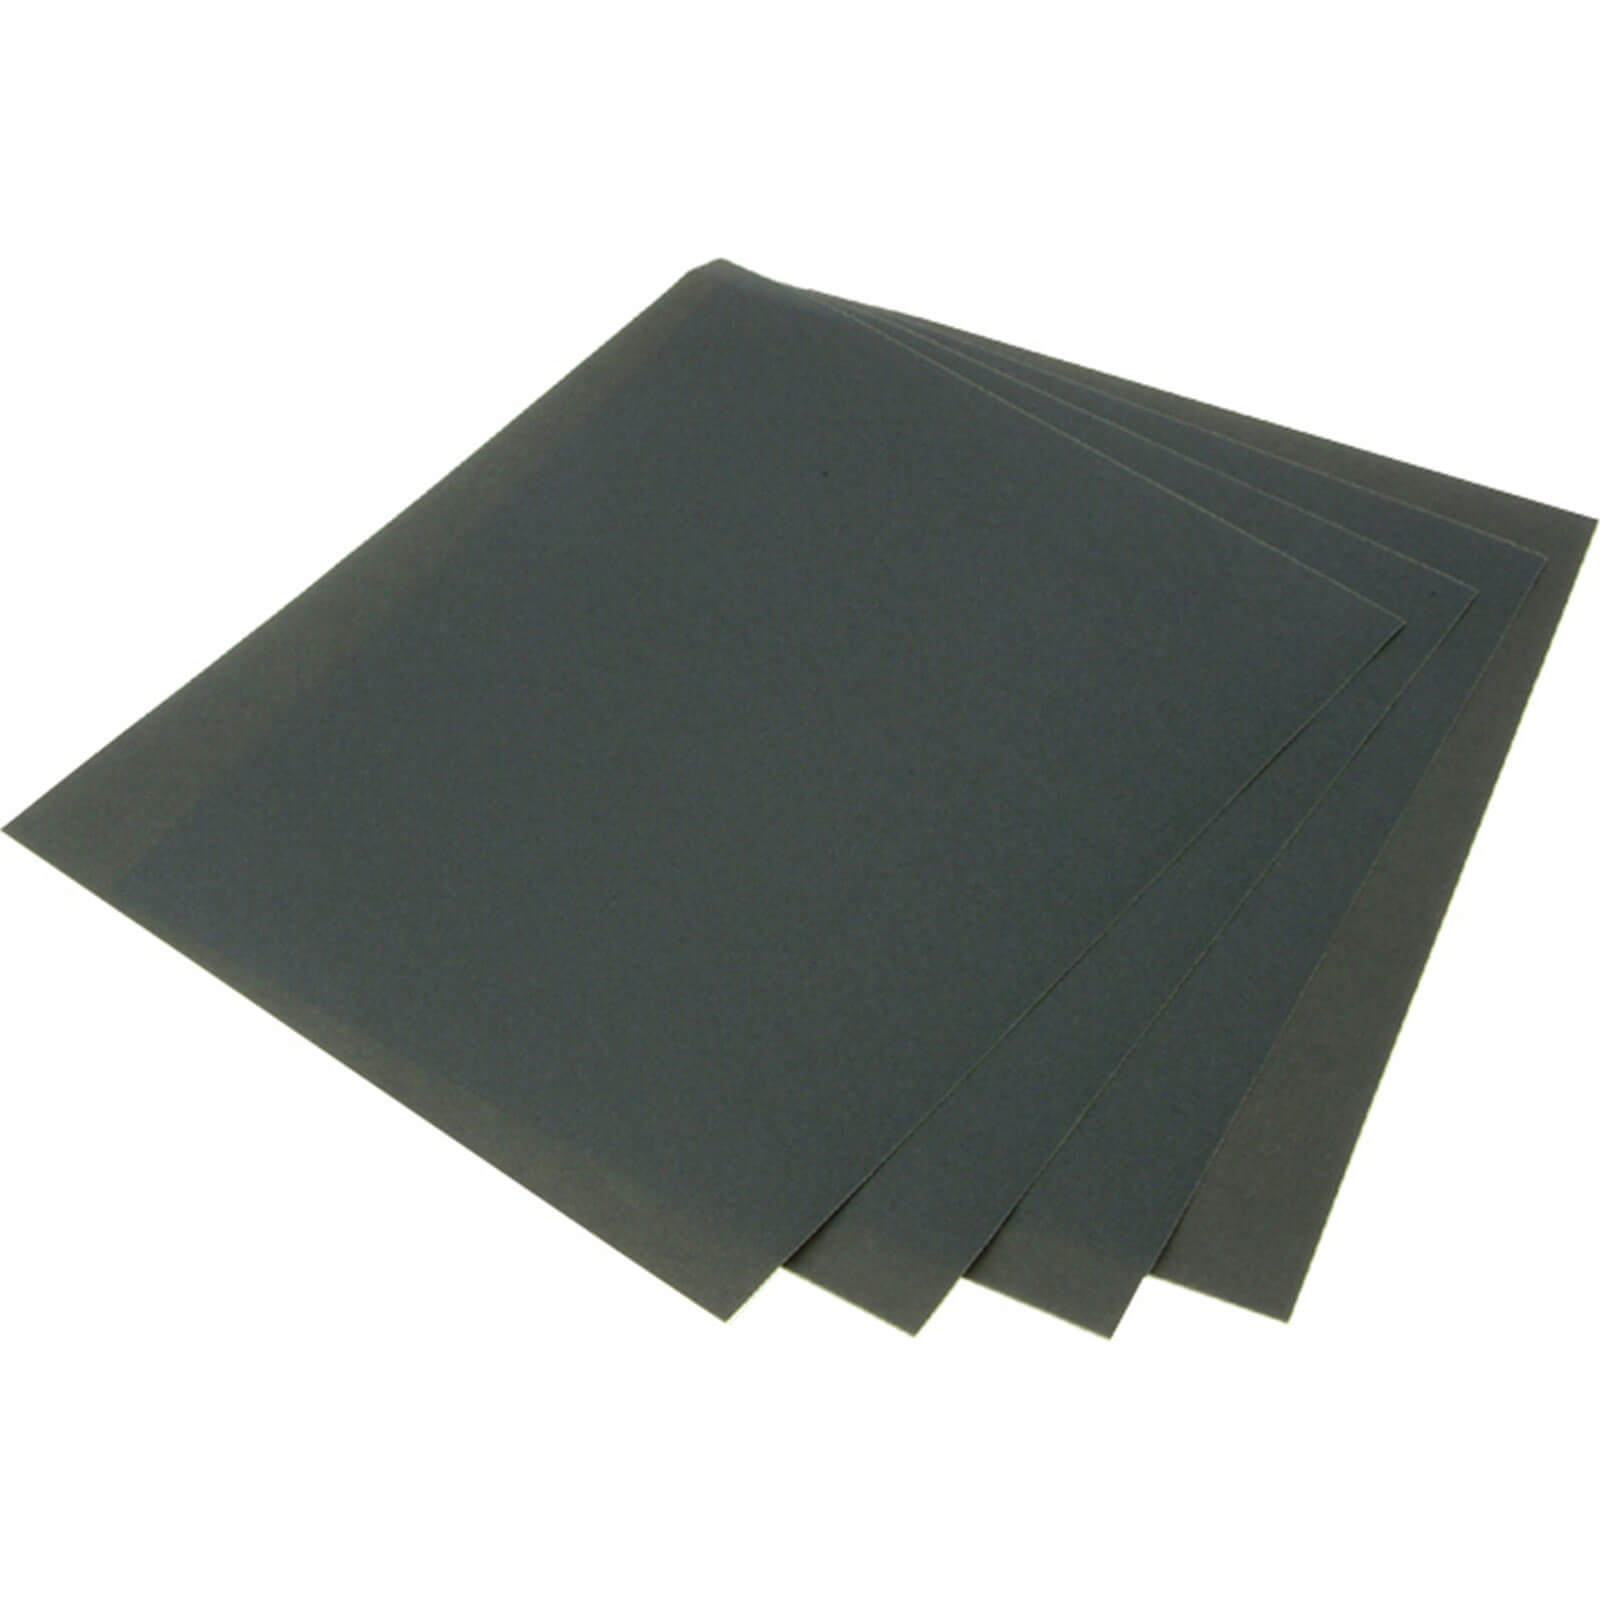 Image of Faithfull Wet and Dry Paper Sheets 230 x 280mm 180g Pack of 25